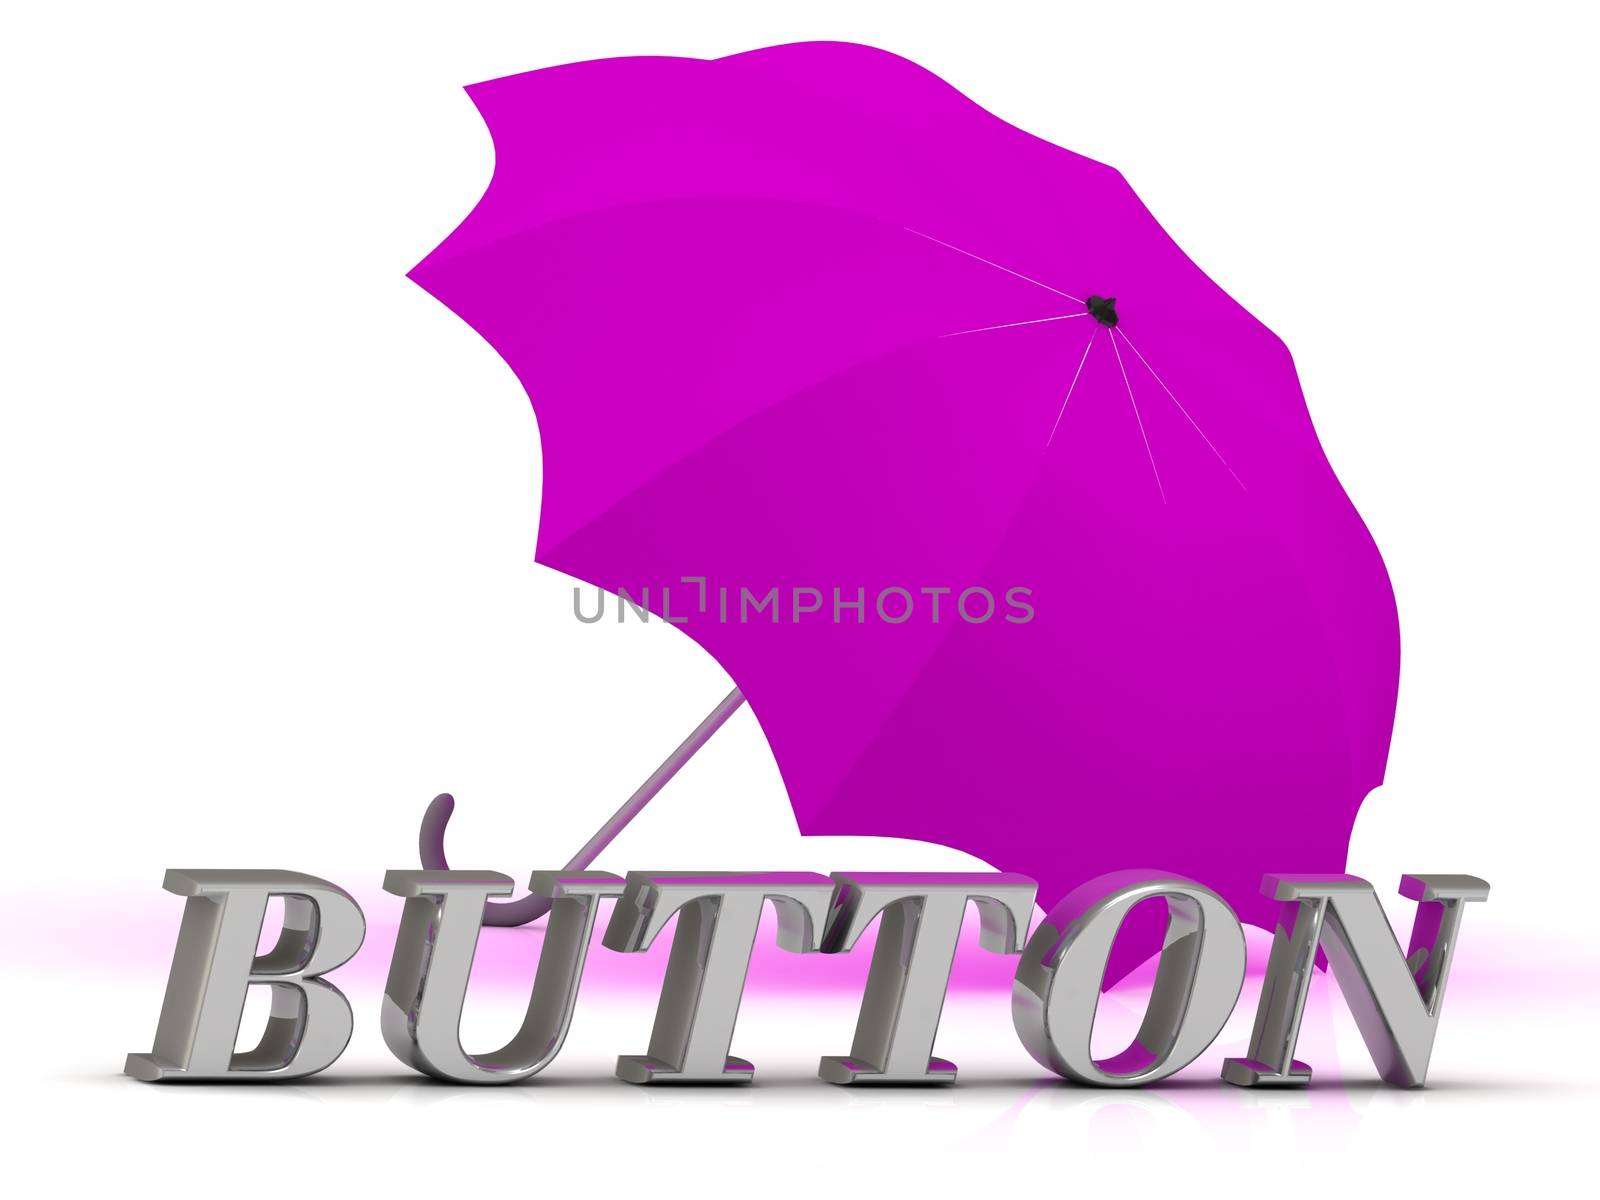 BUTTON- inscription of silver letters and umbrella on white background